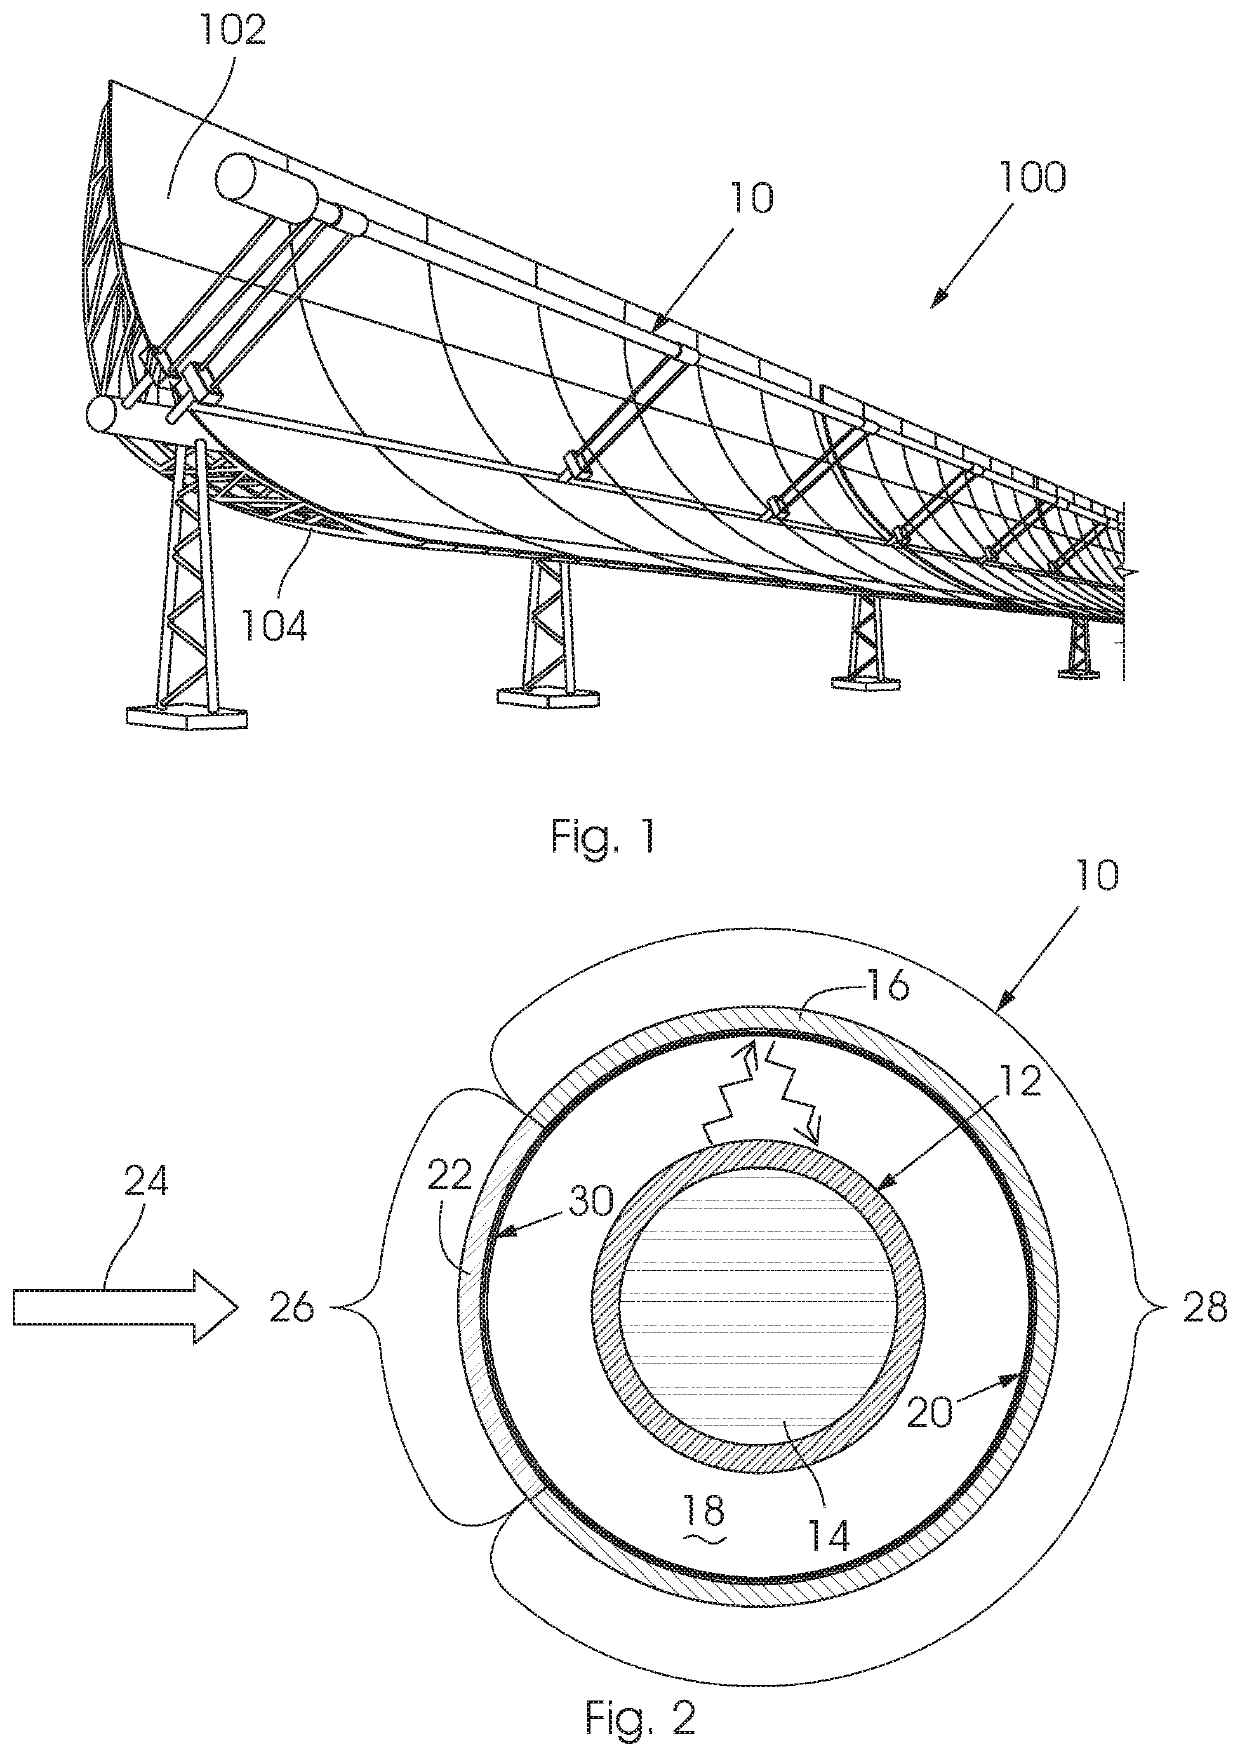 Thermal radiation loss reduction in a parabolic trough receiver by the application of a cavity mirror and a hot mirror coating